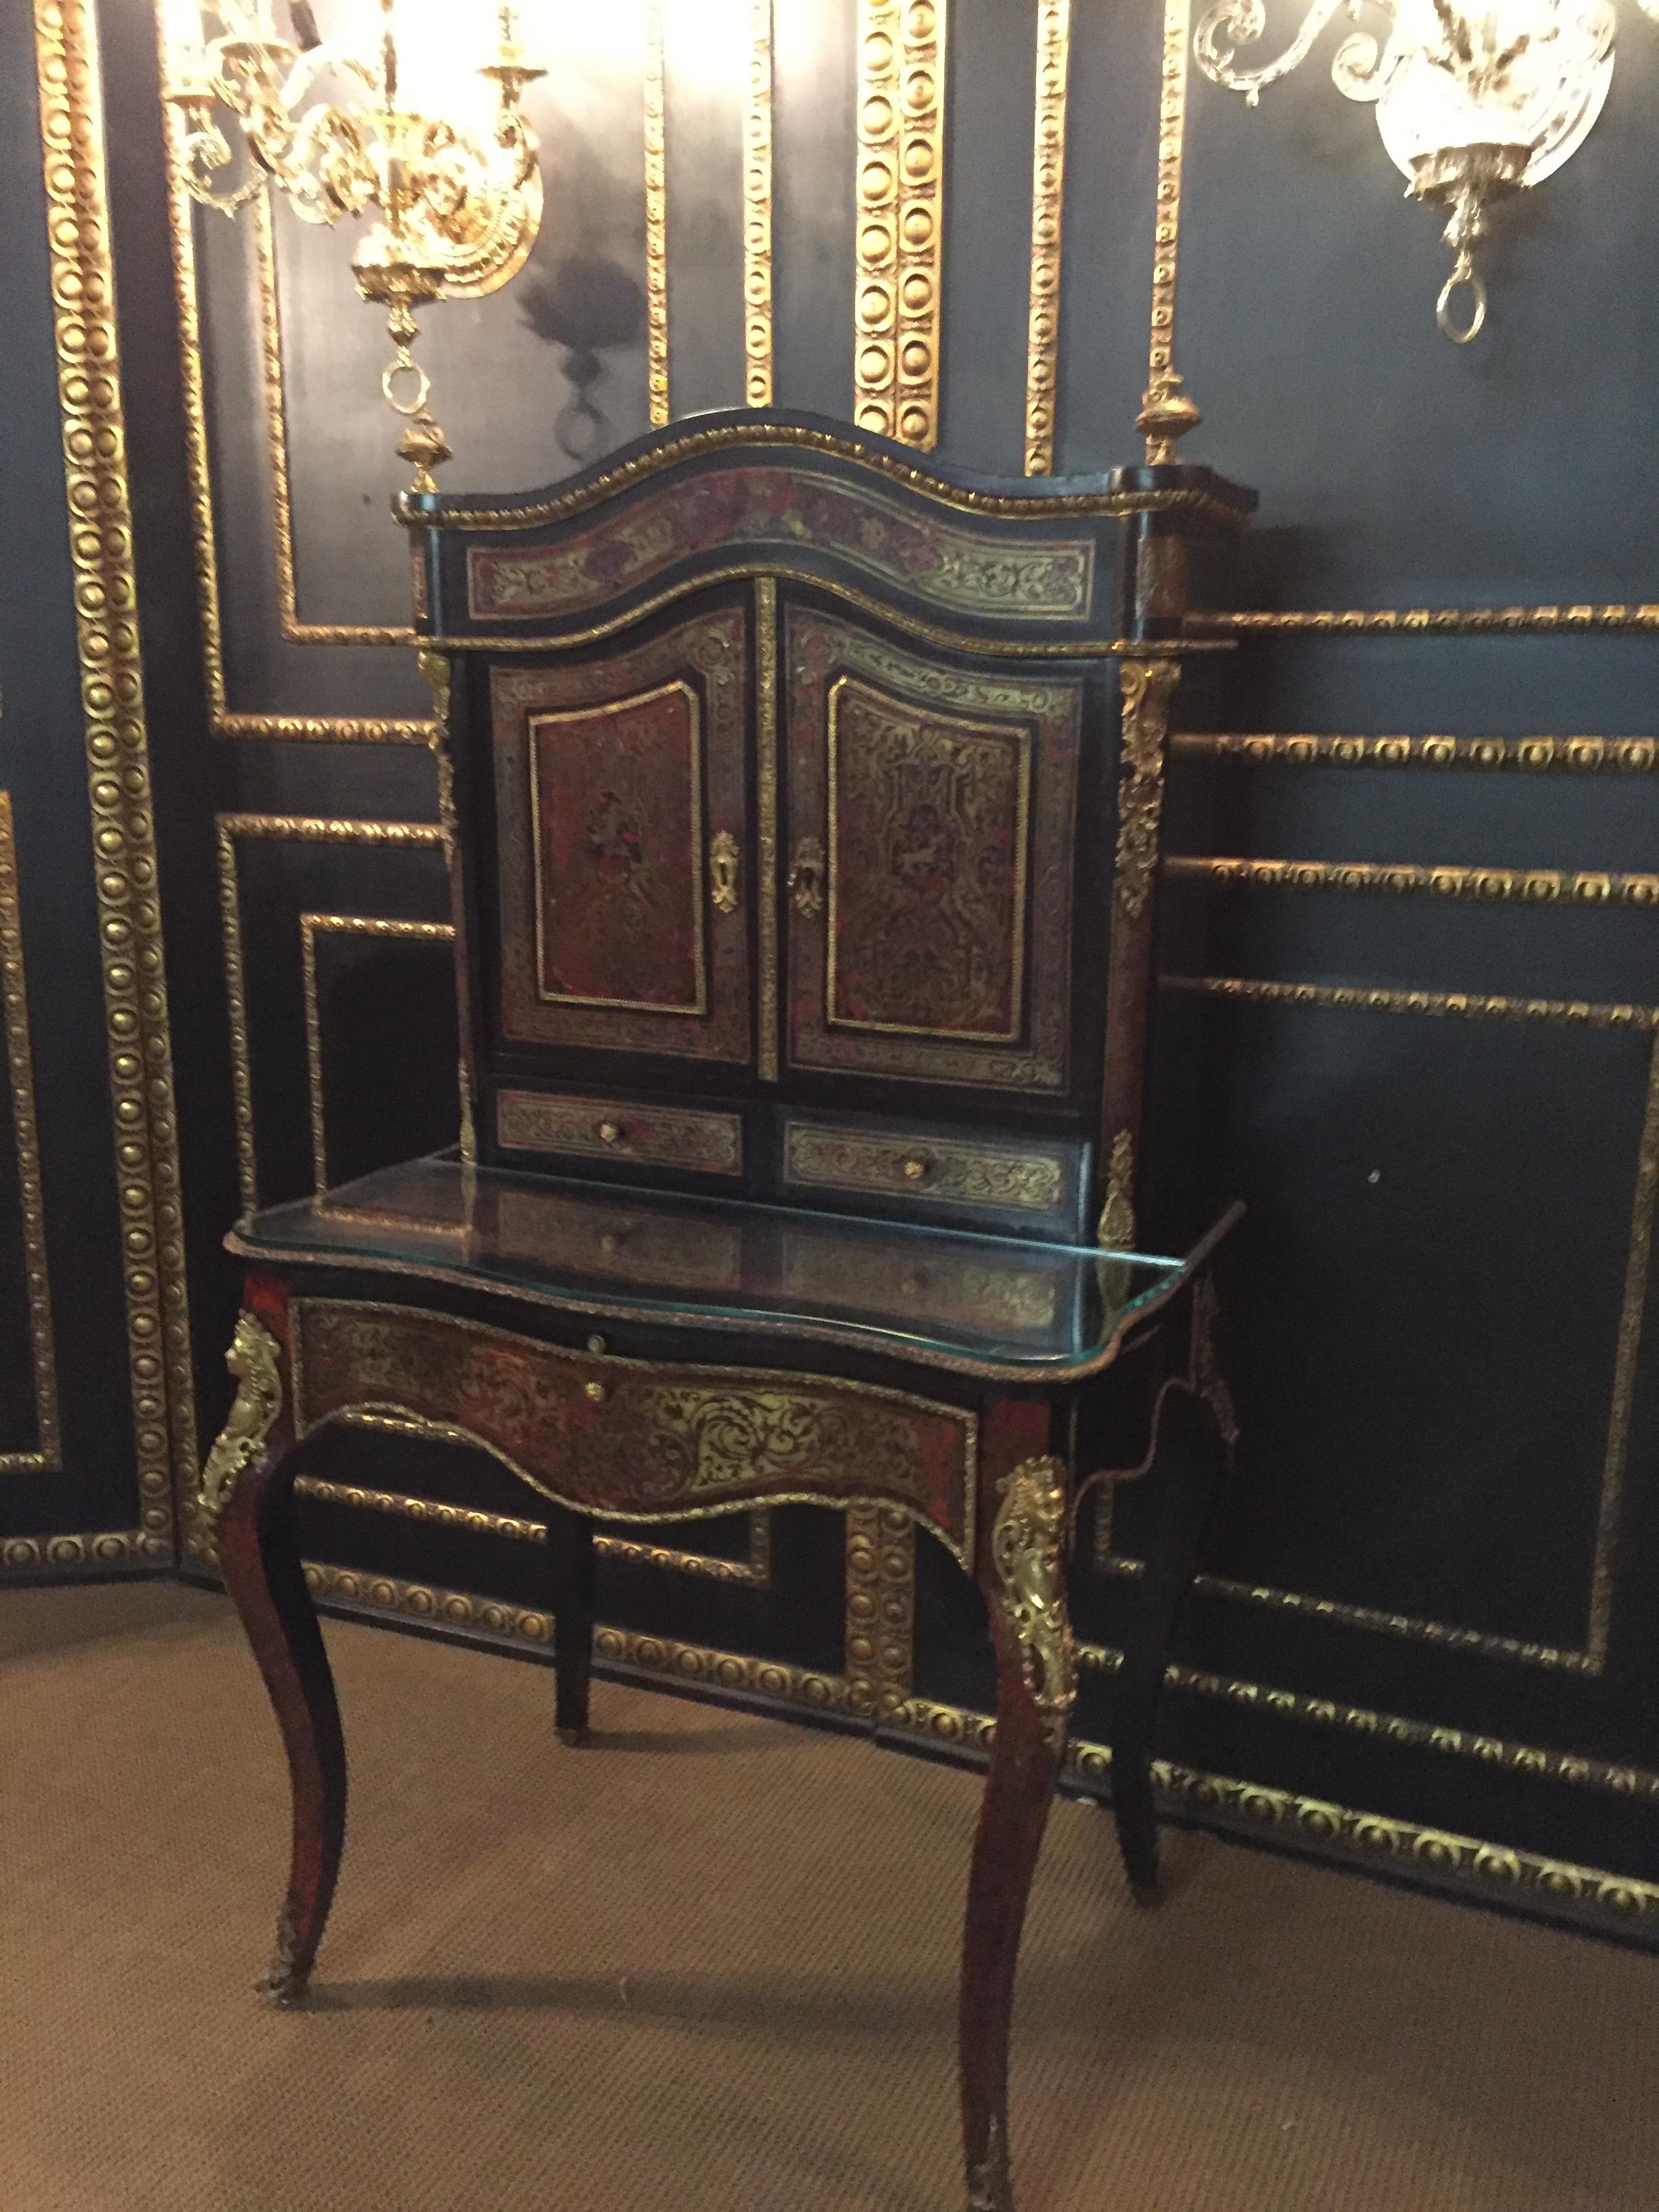 Gilt bronze are distinctive and of exceptionally good quality. Ebonized solid oakwood with brass inlays Boulle technique. The top are two wide doors with an infill filled panel flanked by fittings in the form of female masks on a curved frame. Fries